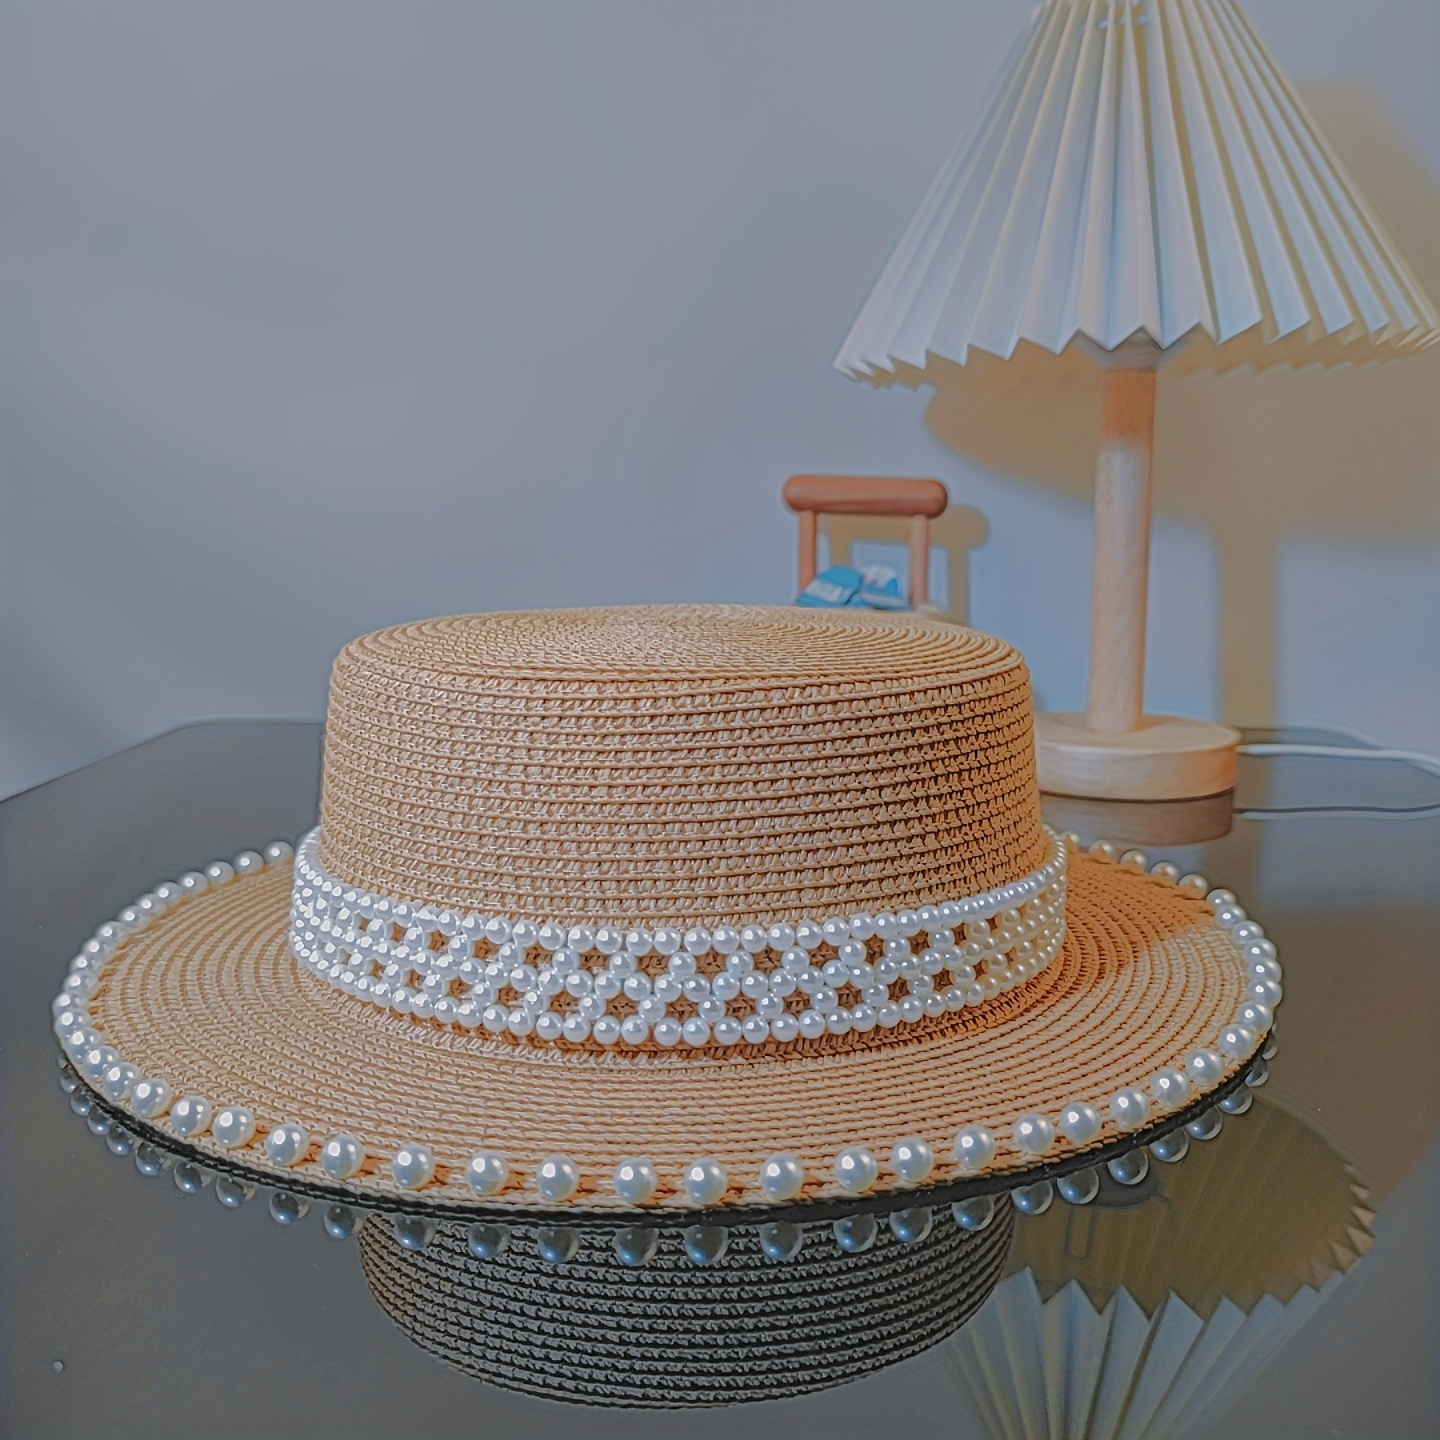 img.kwcdn.com/product/carnival-mexican-straw-hat/d